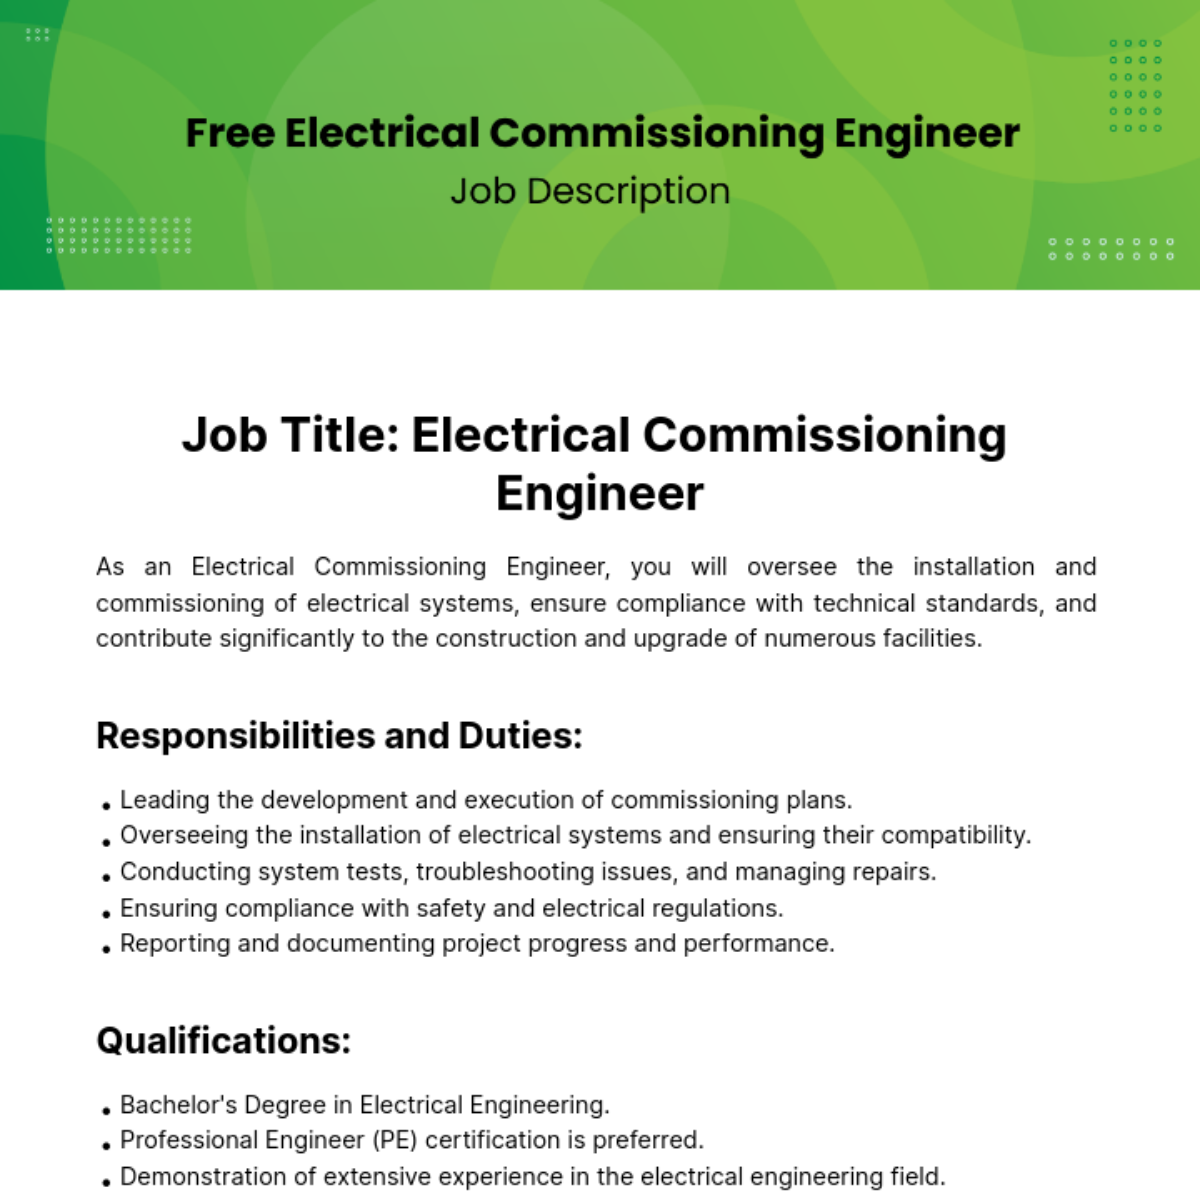 Free Electrical Commissioning Engineer Job Description Template